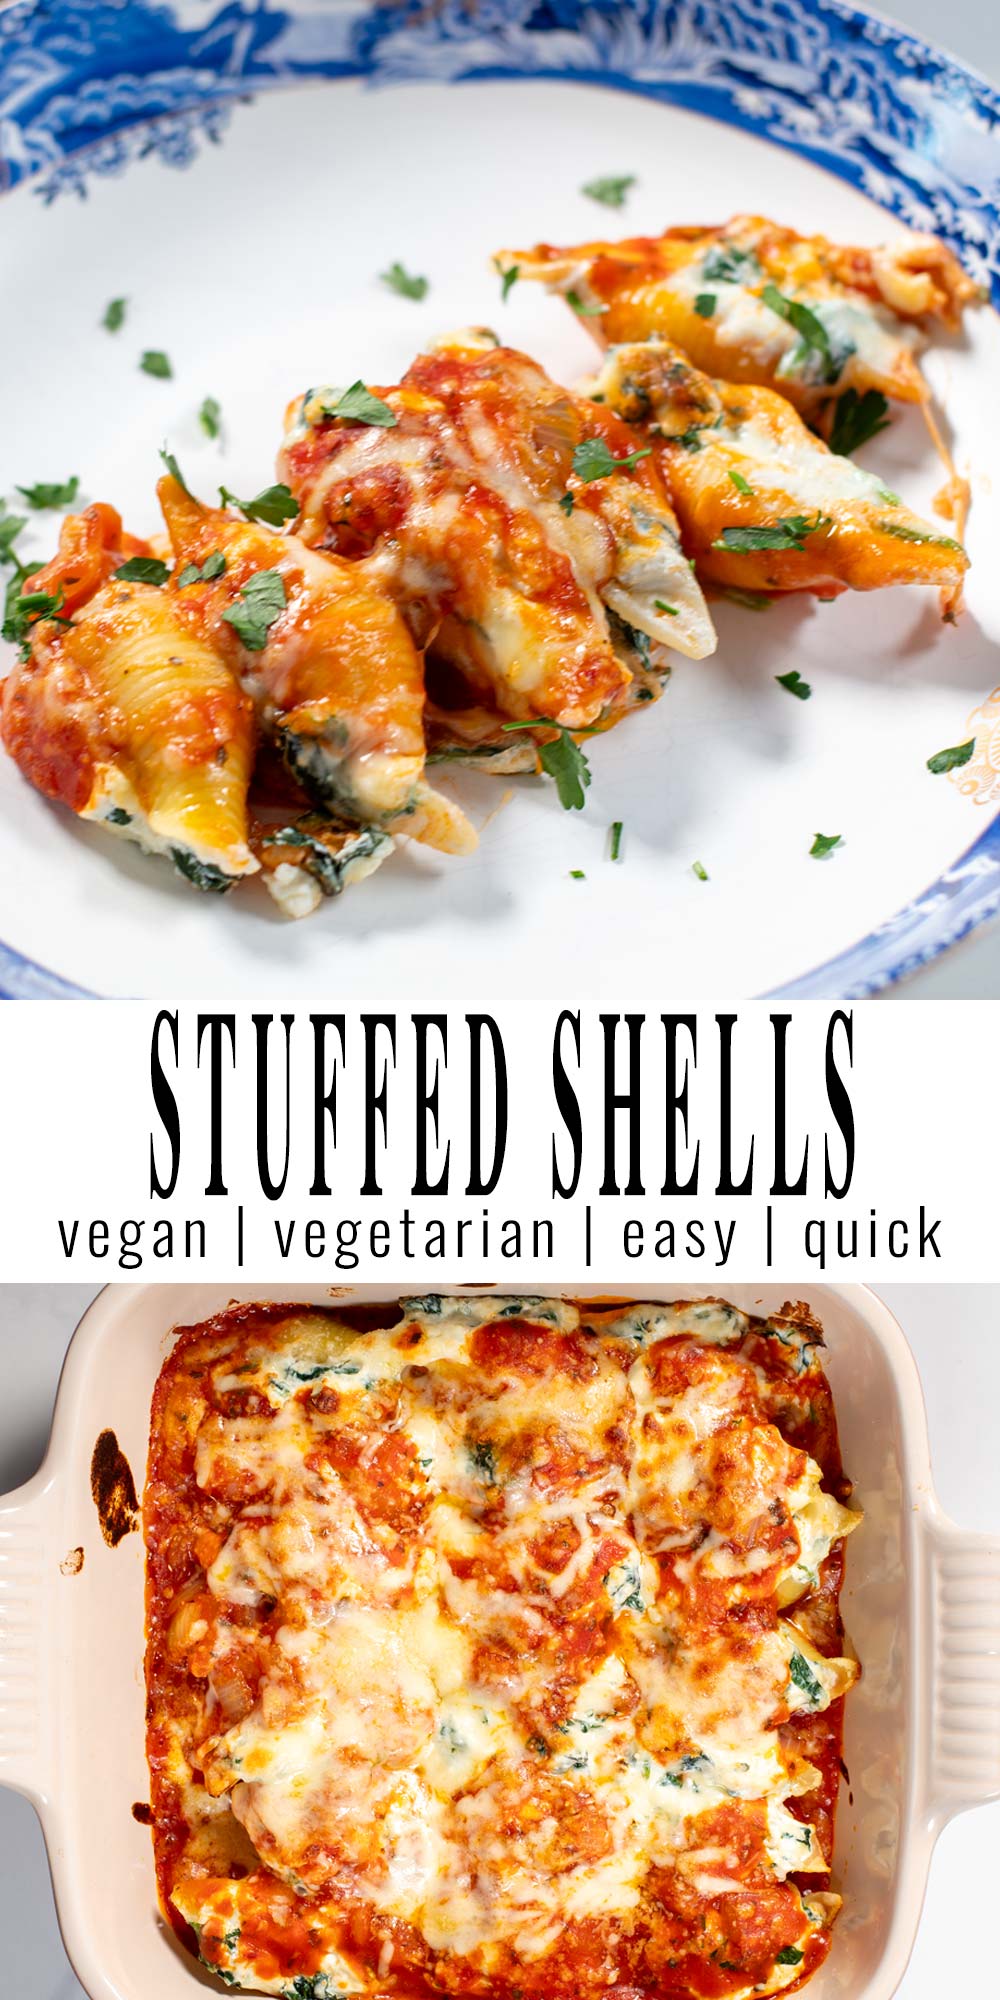 Collage of two photos of stuffed shells with recipe title text.